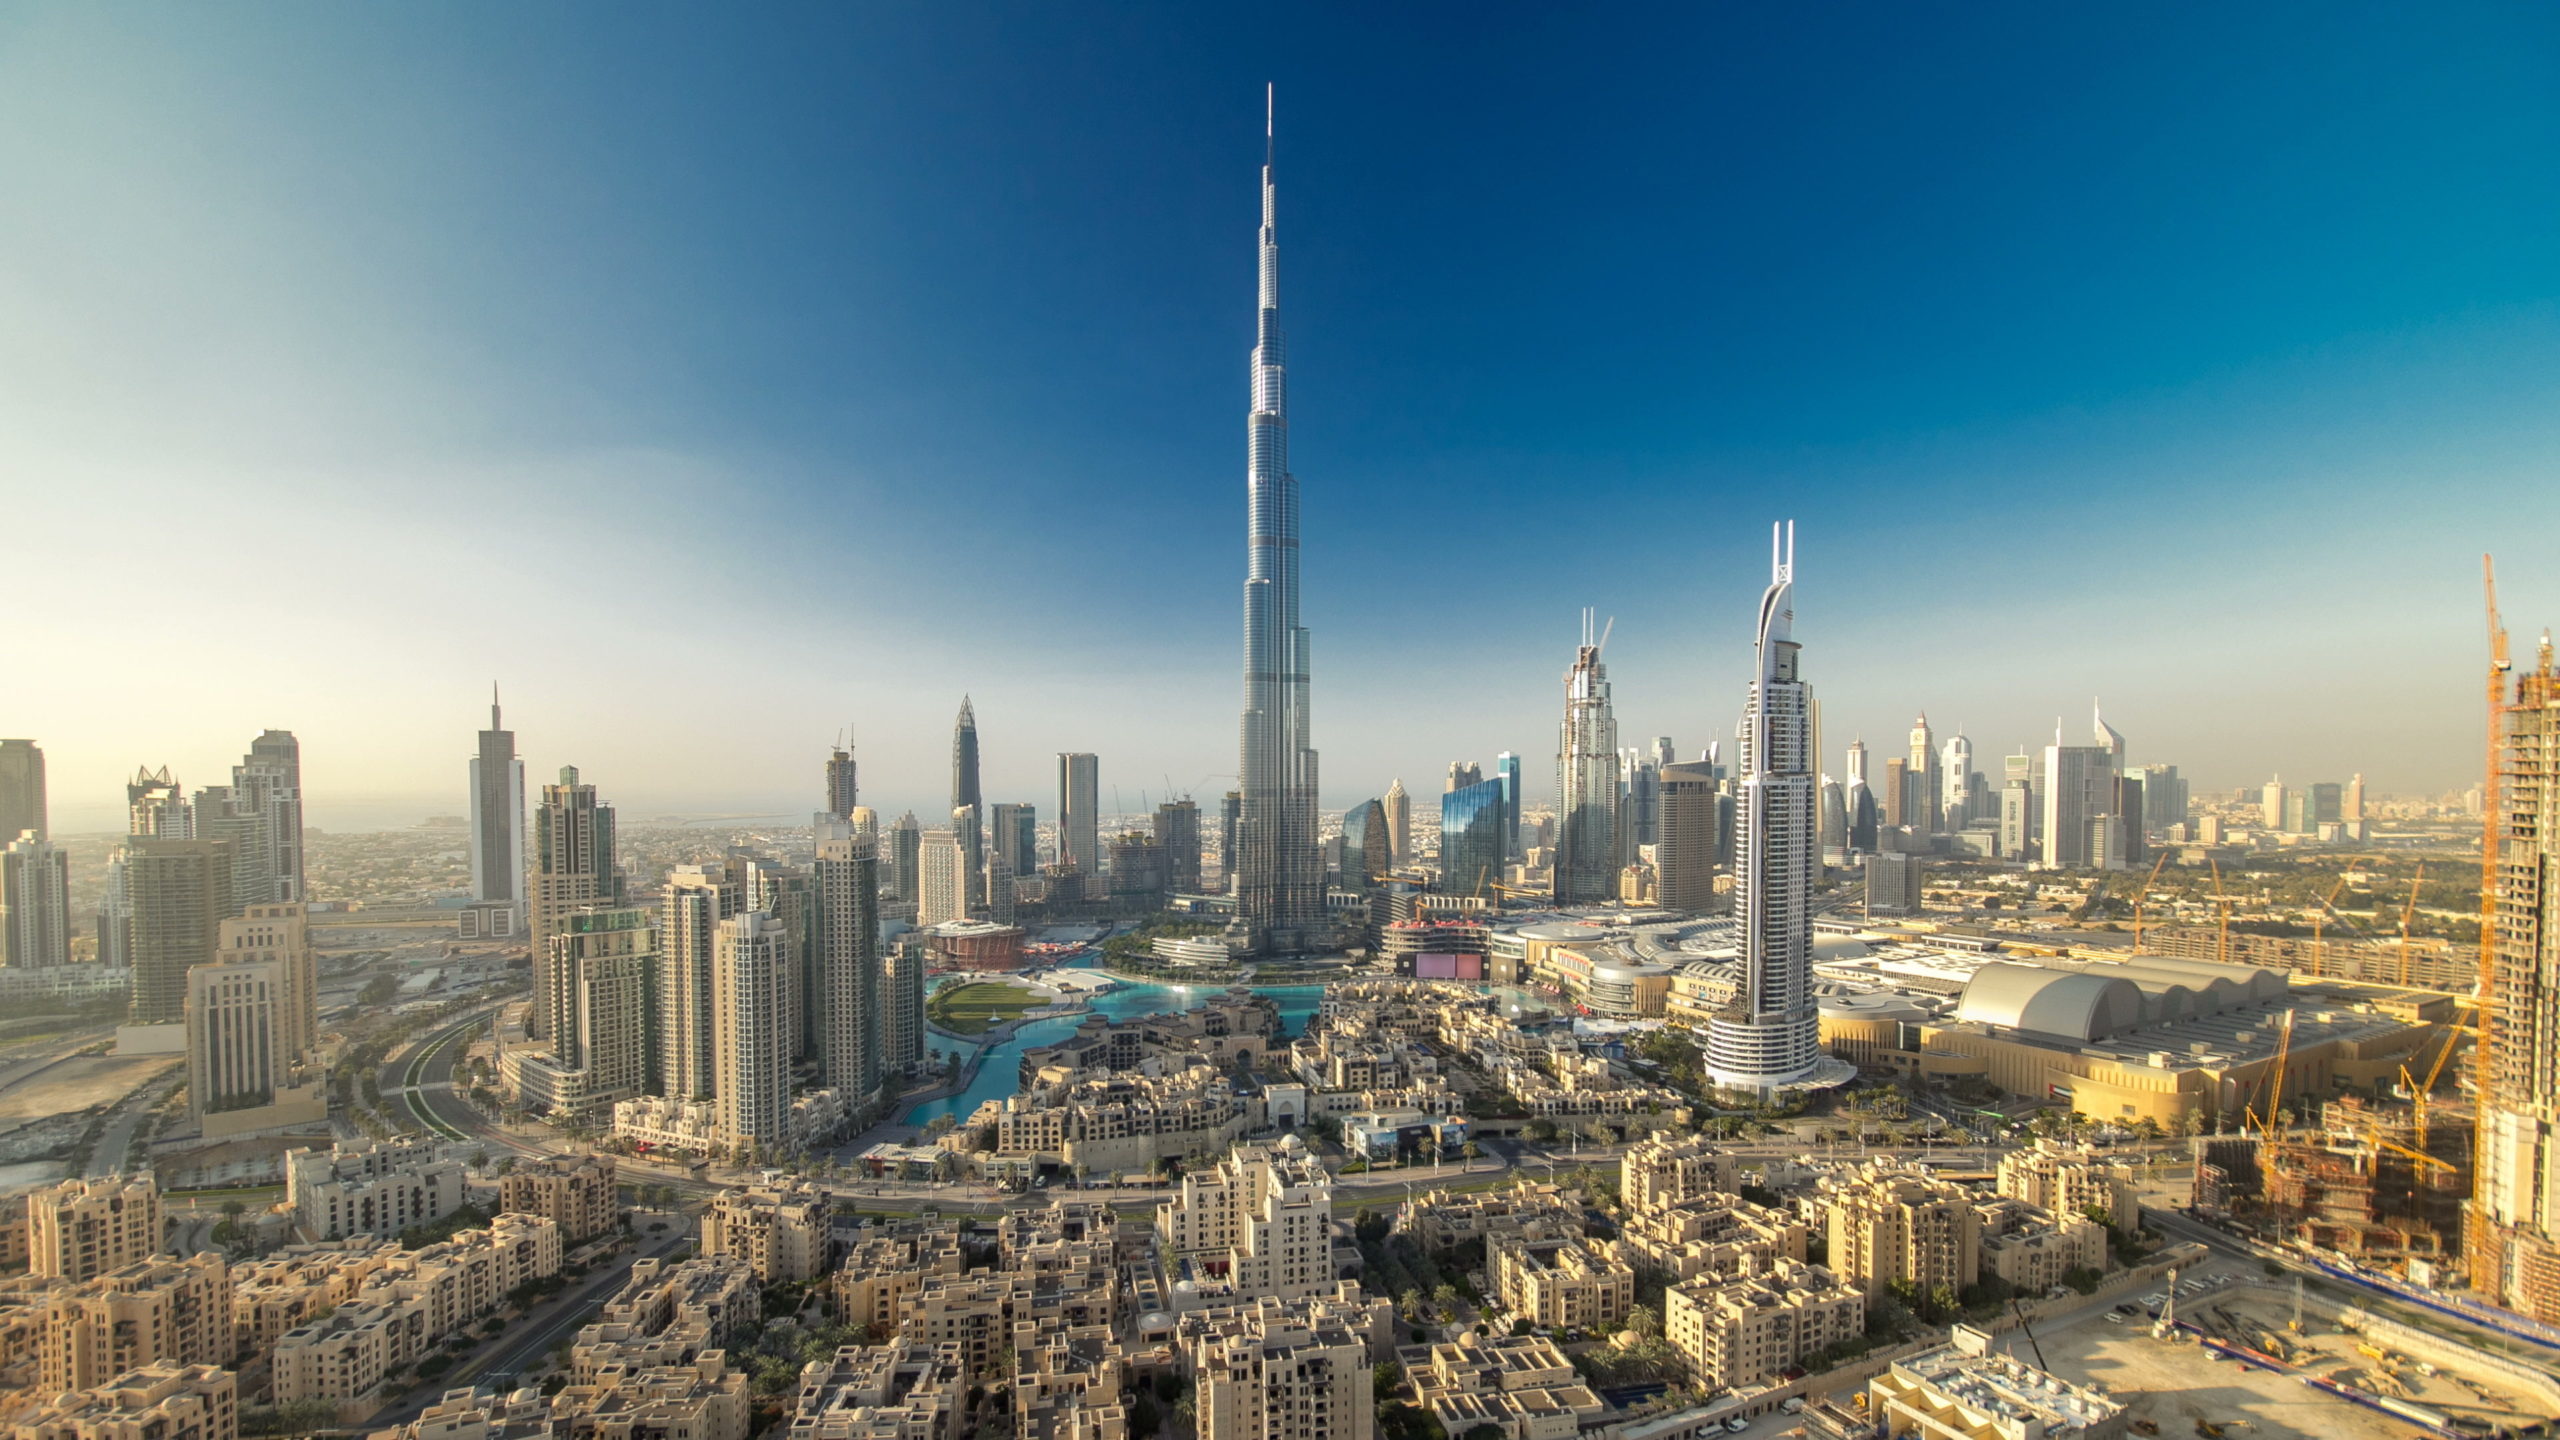 Dubai Housing Market Shows Signs of Growth